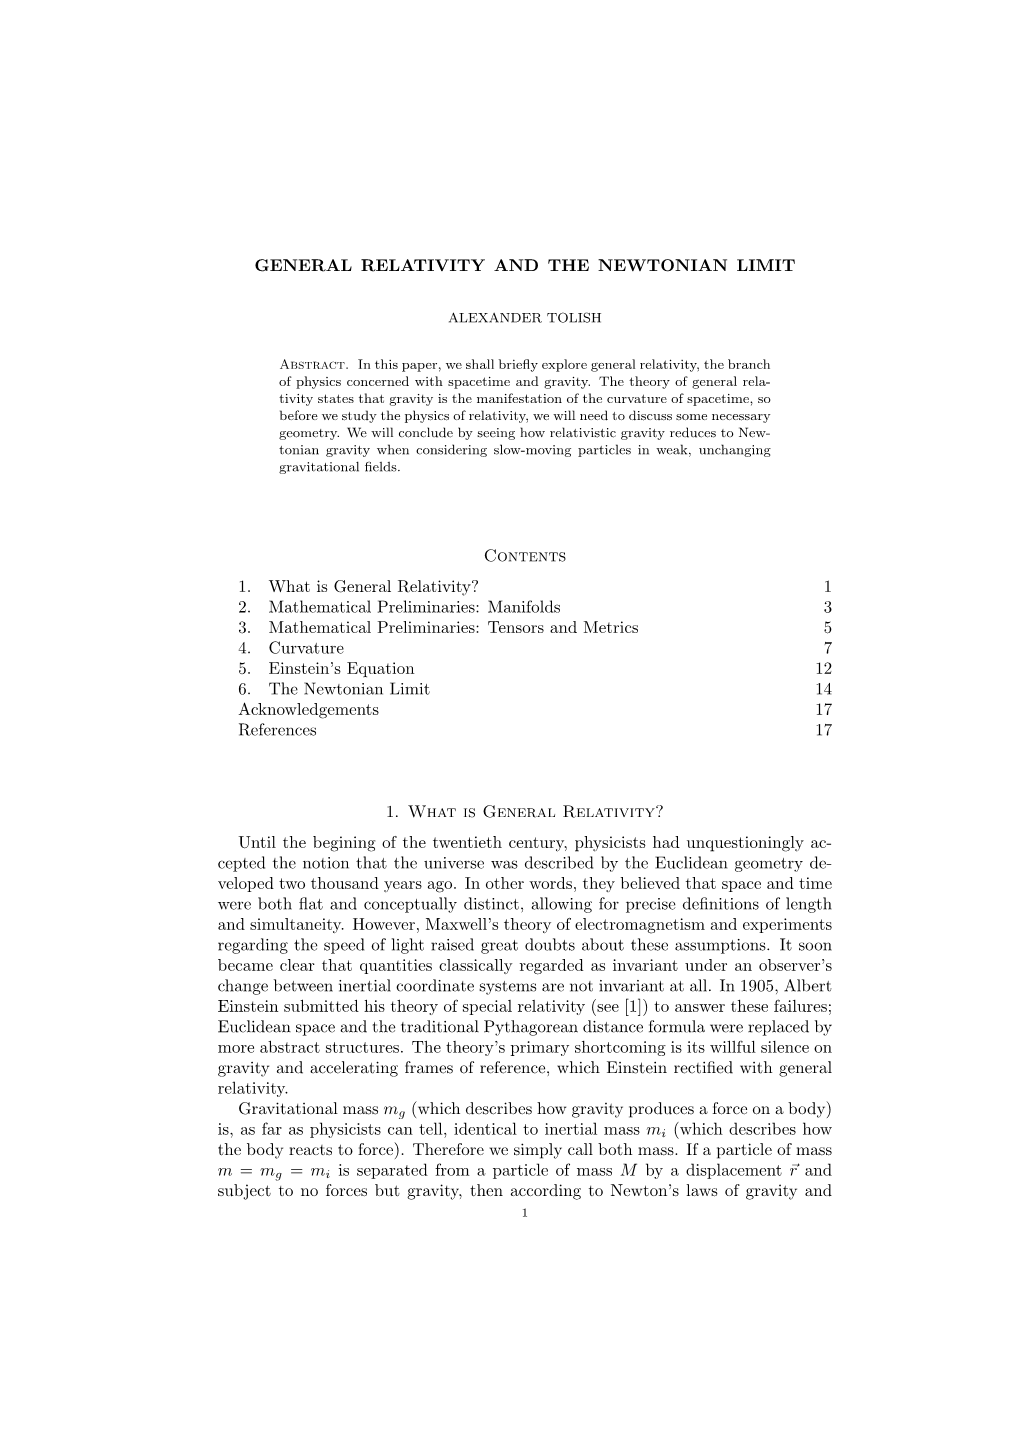 General Relativity and the Newtonian Limit